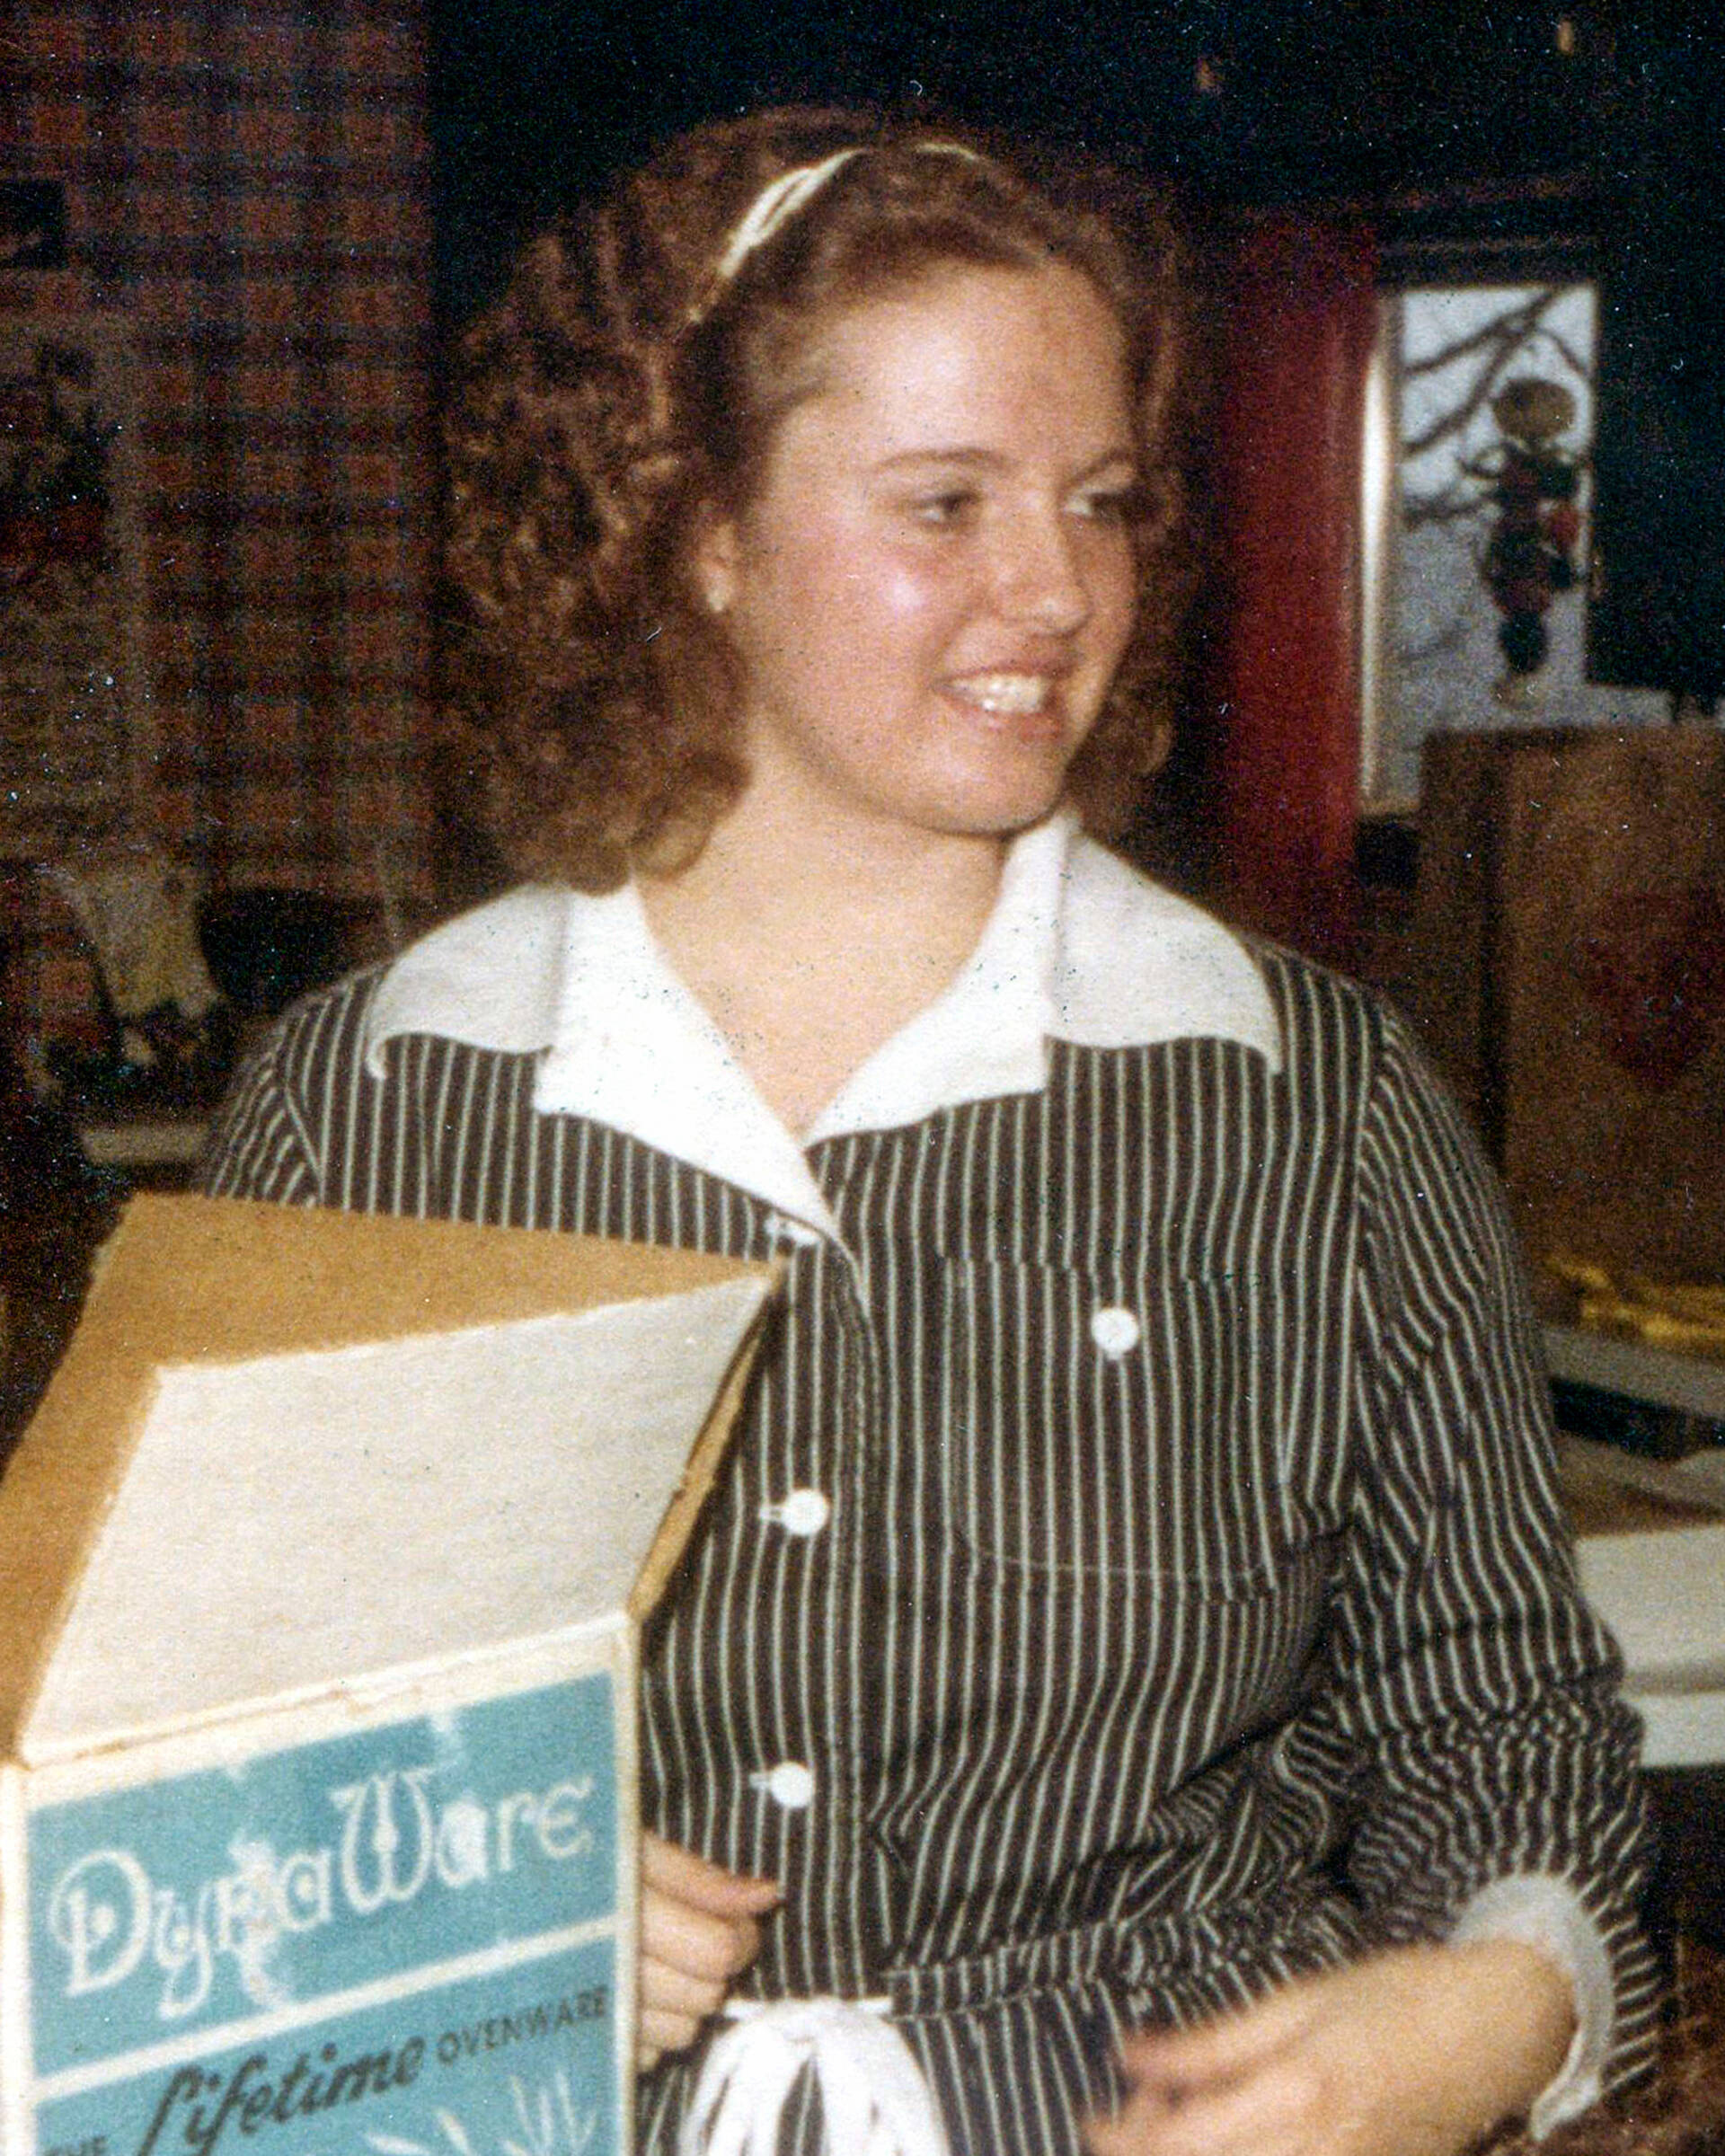 (Courtesy Photo)
This photo shows Robin Pelkey just before her 18th birthday, according to the Alaska Department of Public Safety. Pelkey was recently identified as a victim of convicted serial killer Robert Hansen.